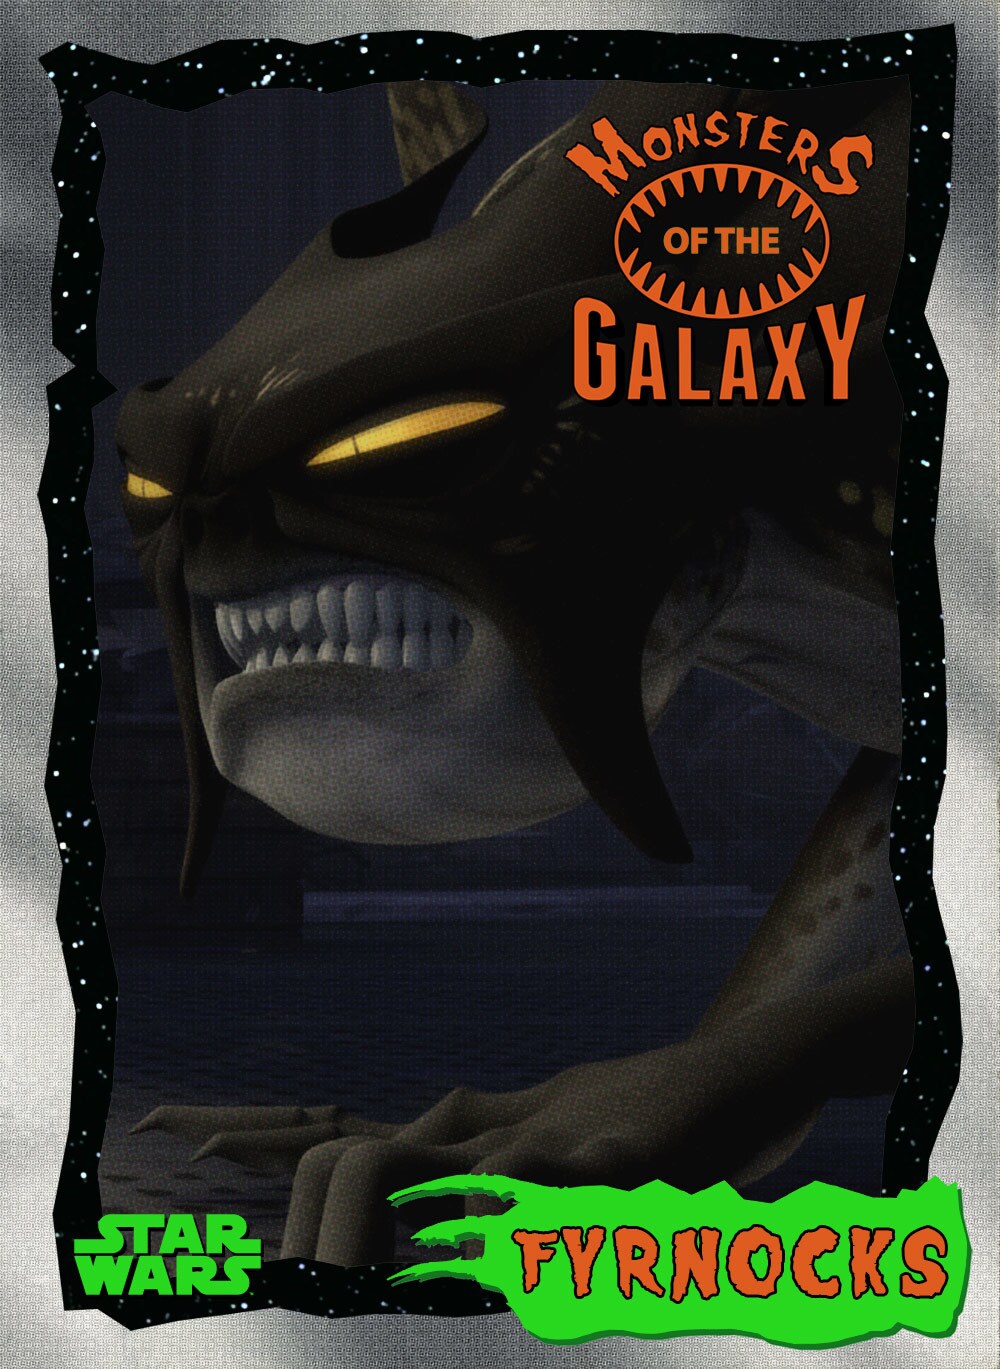 A Monsters of the Galaxy trading card featuring a Fyrnock.